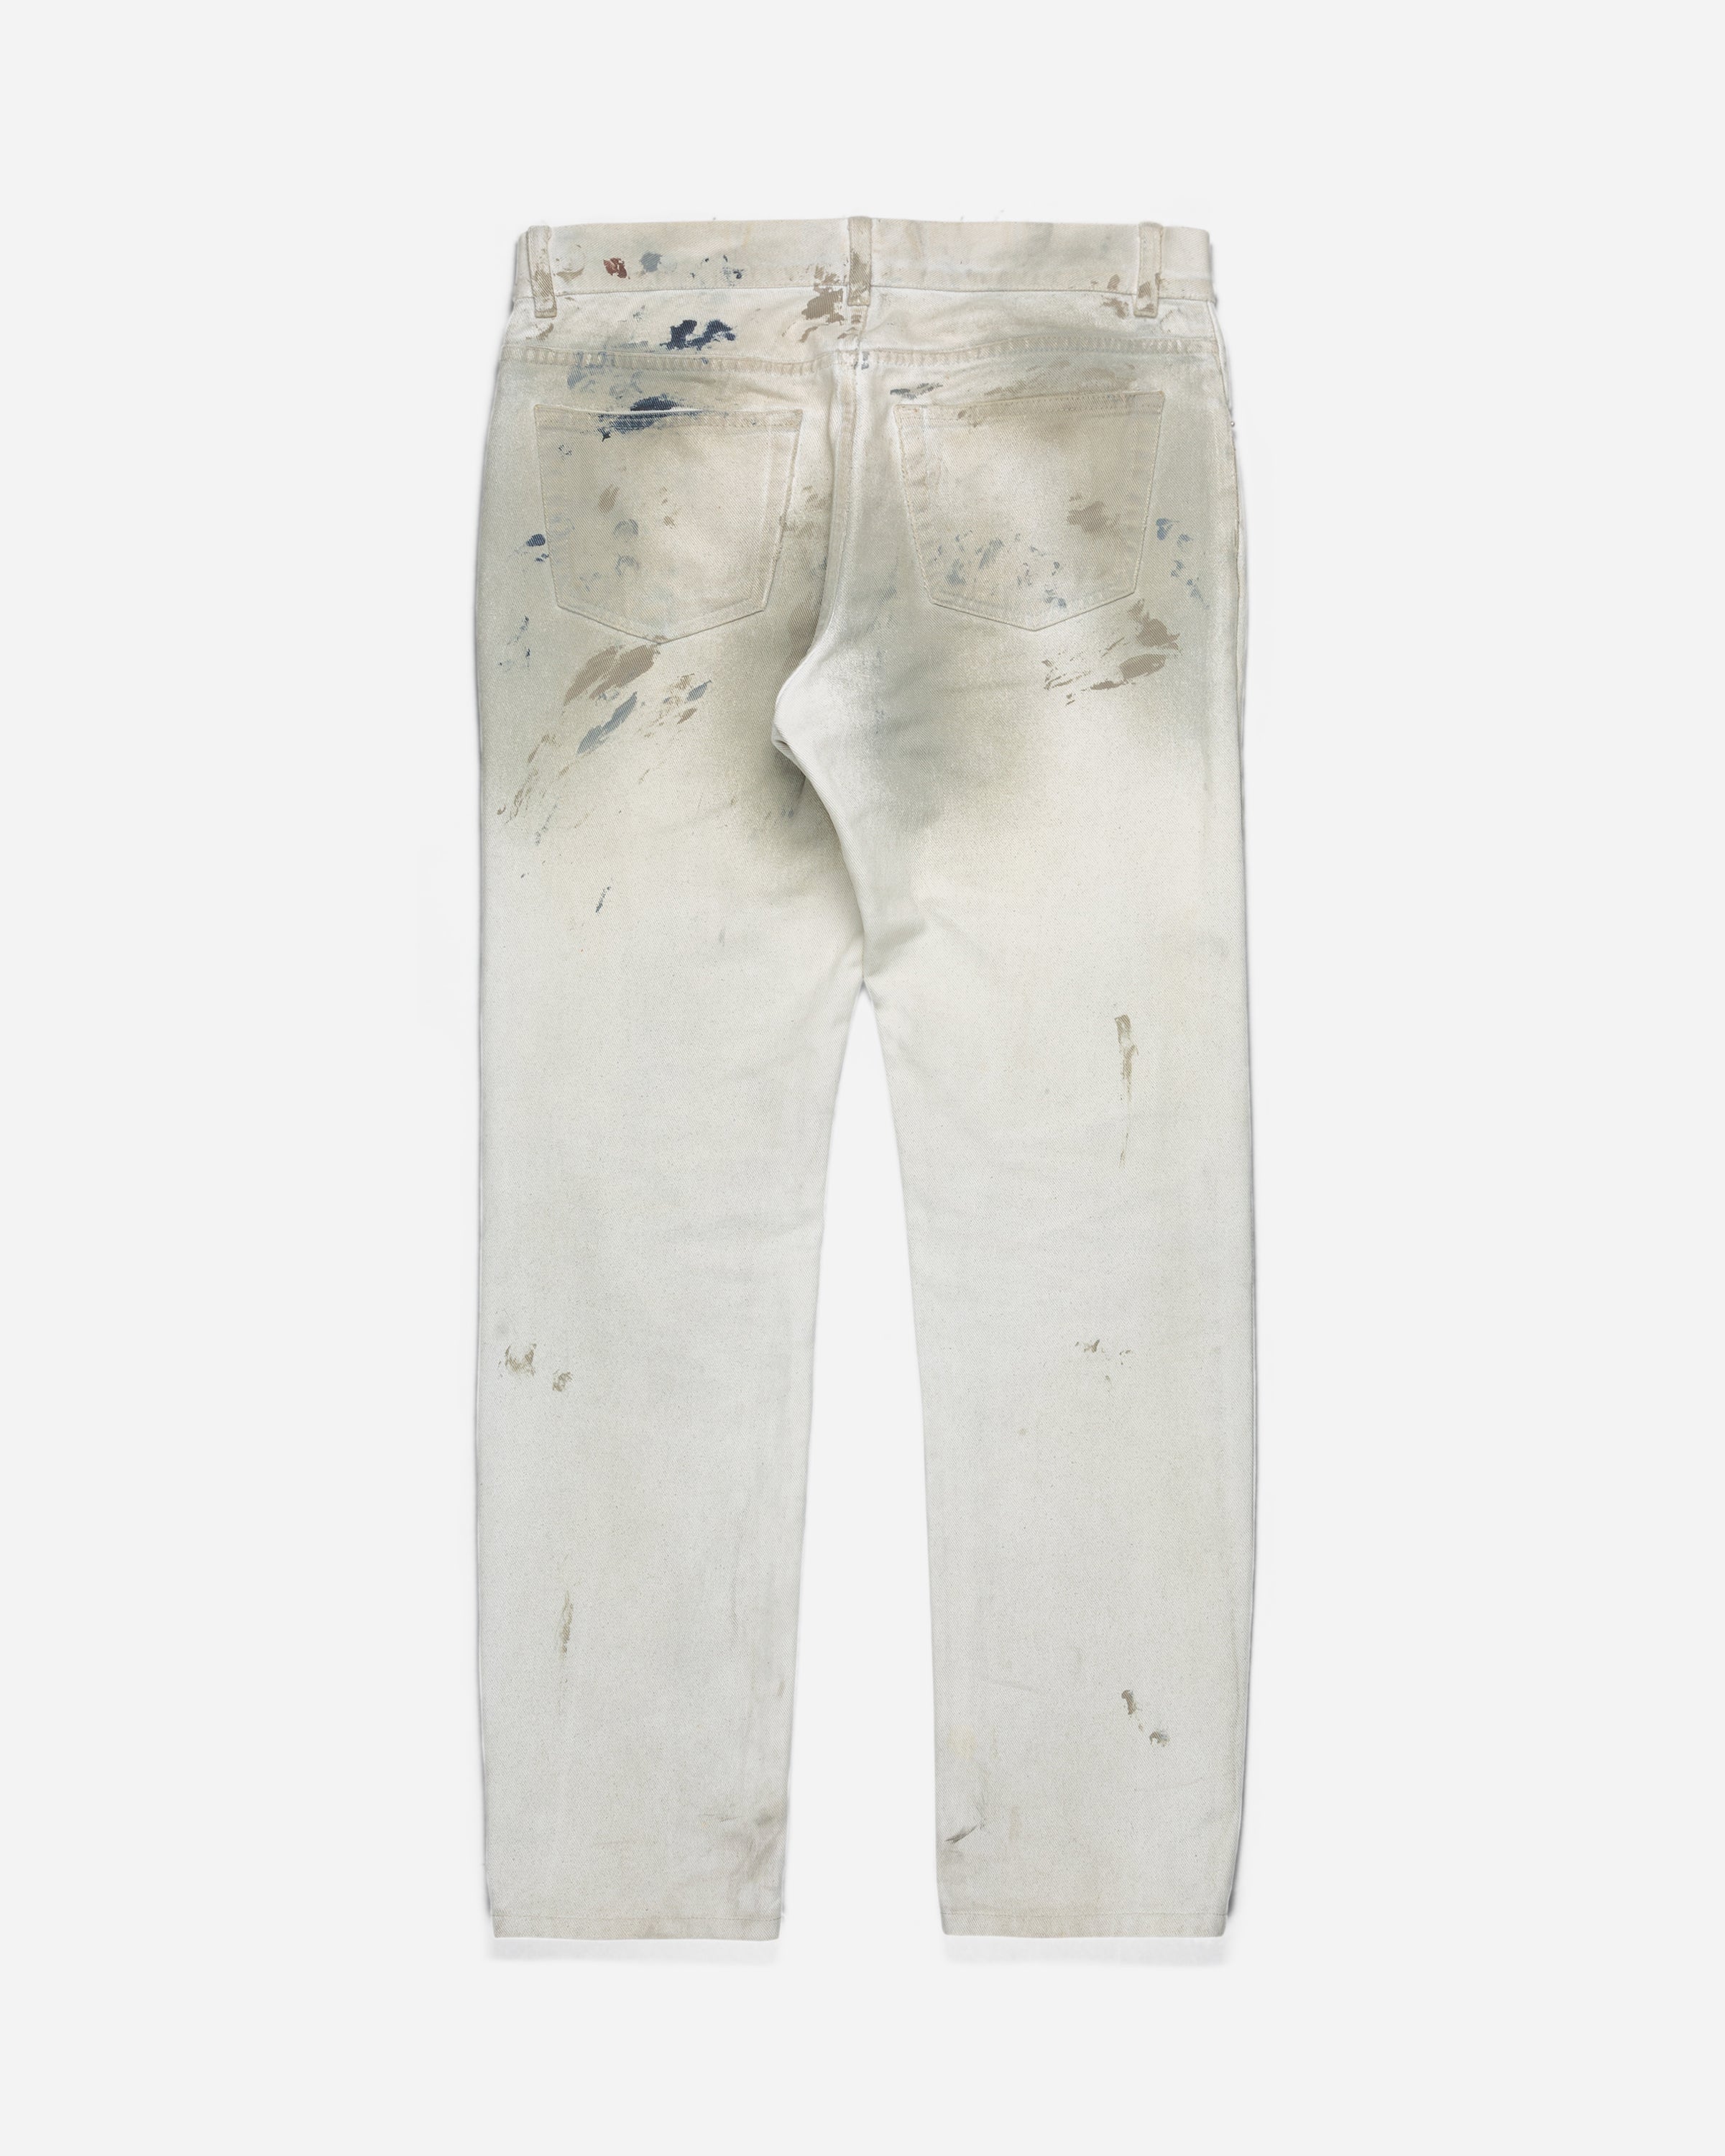 Helmut Lang White Painted Jeans - SS03 - SILVER LEAGUE